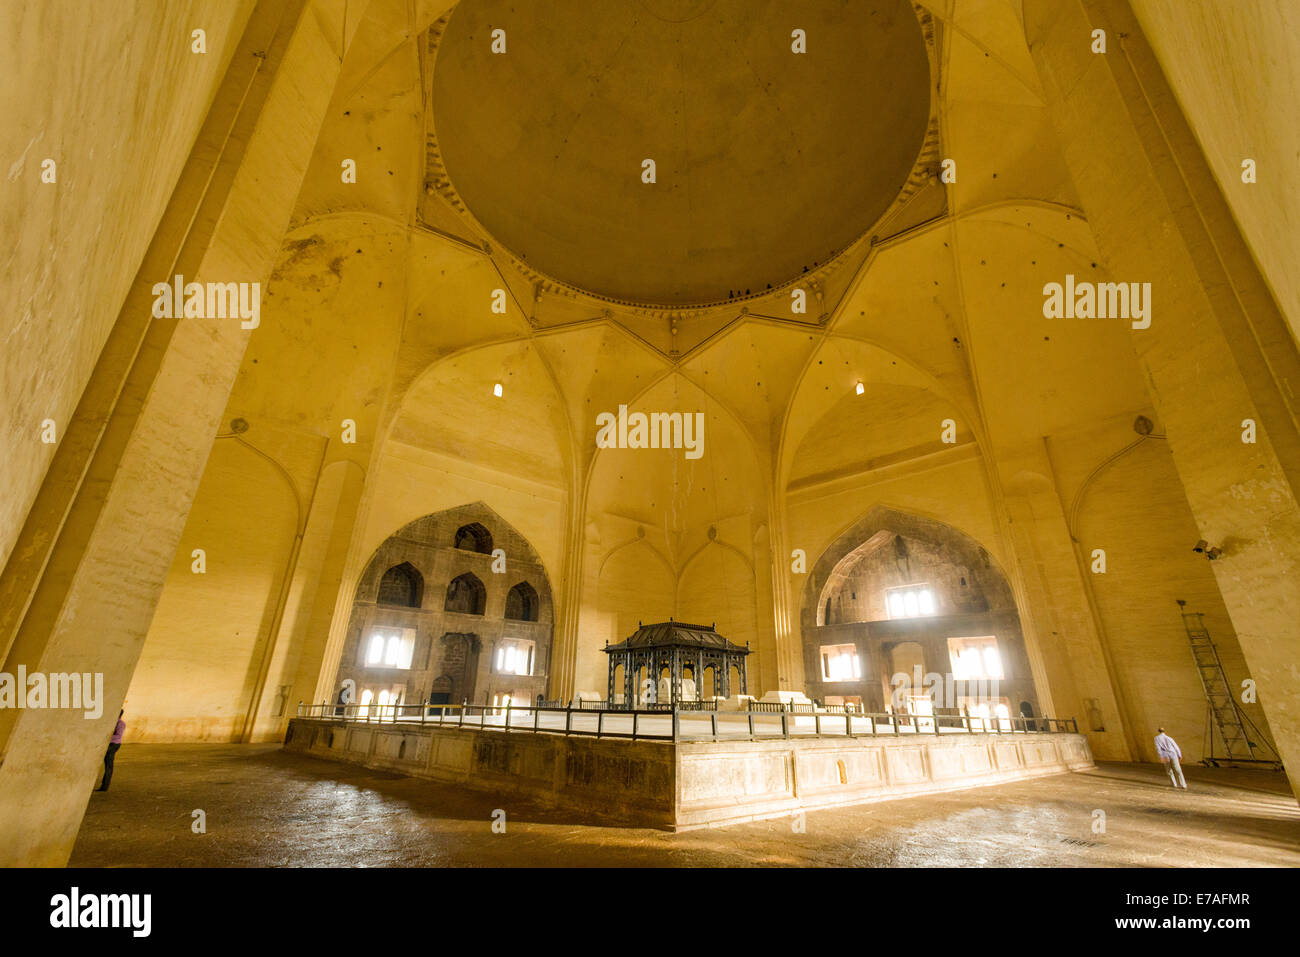 The dome of the Gol Gumbaz, the tomb of Mohammed Adil Shah, Bijapur, Karnataka, India Stock Photo